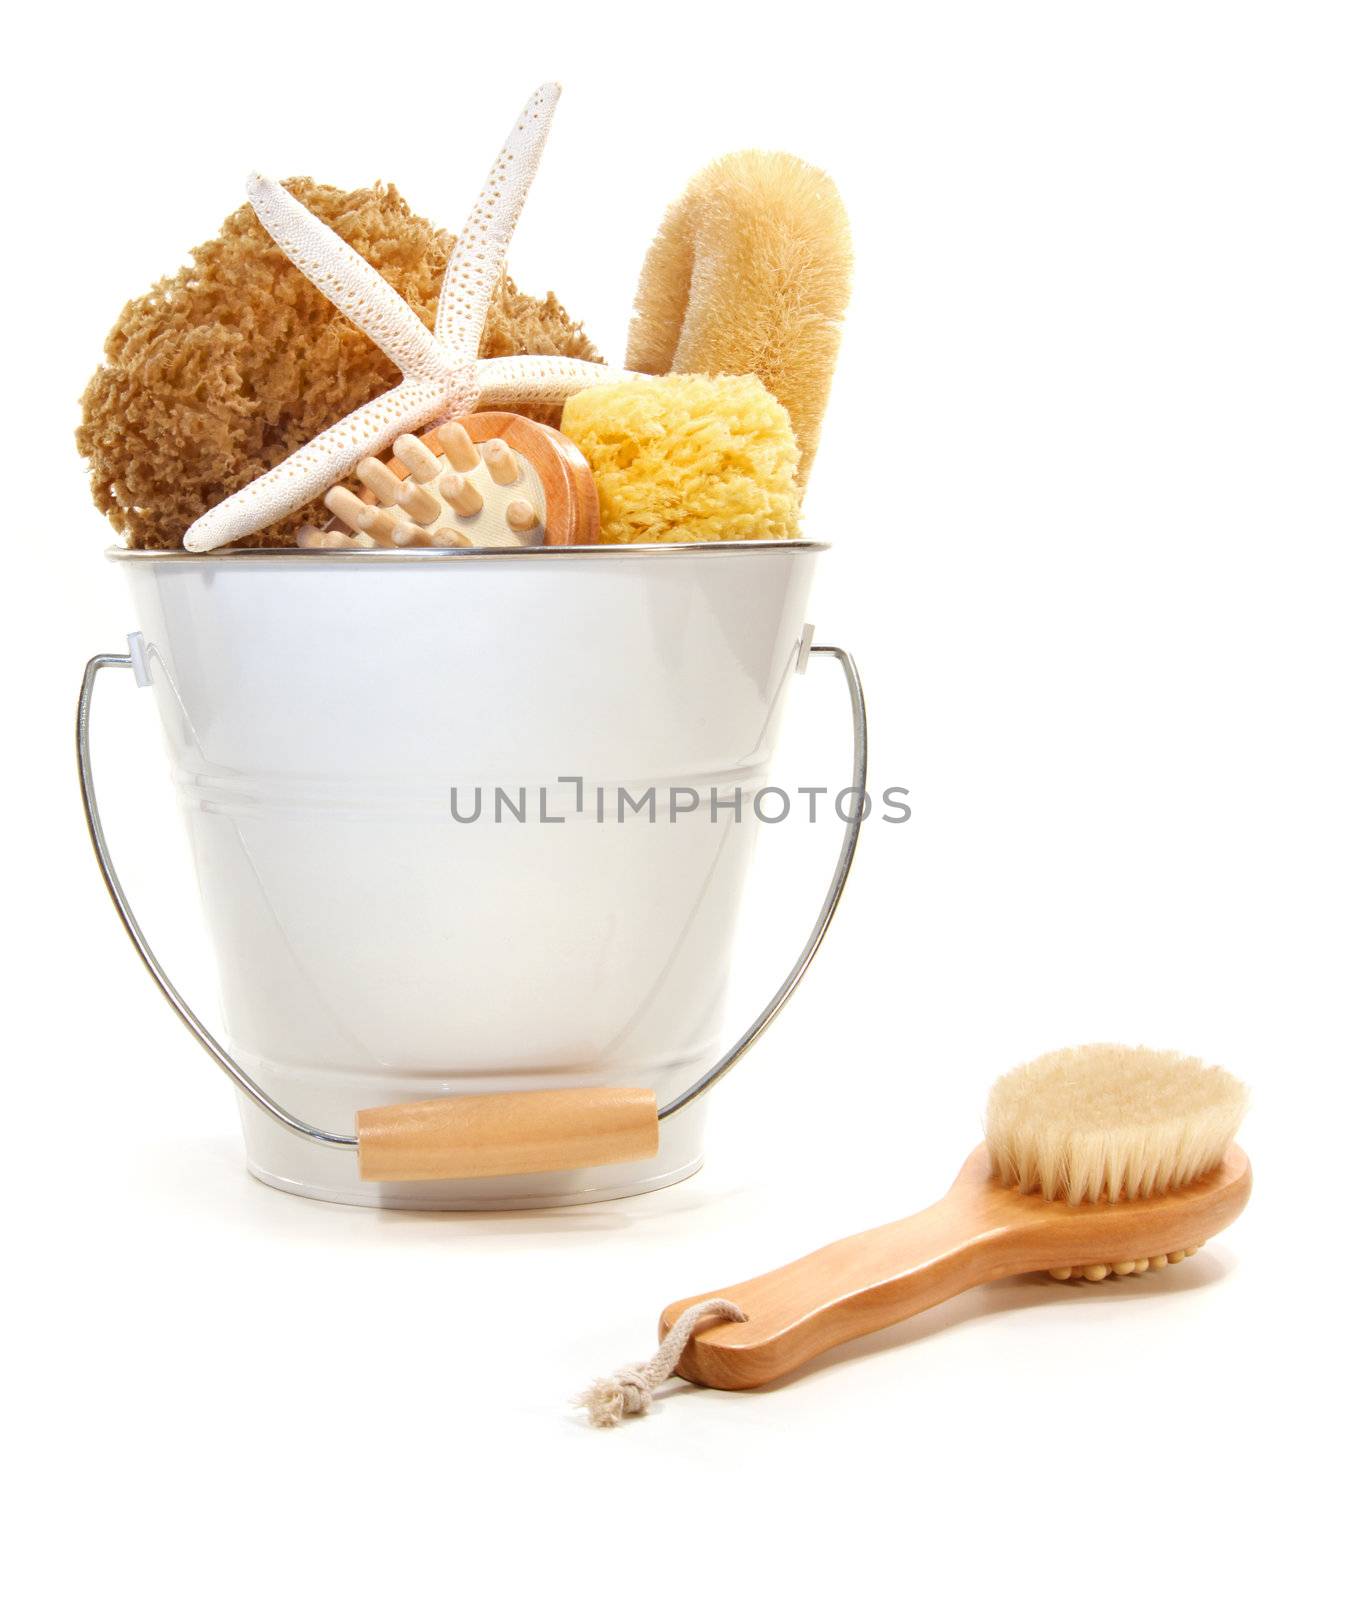 White bucket filled with sponges and scrub brushes  by Sandralise